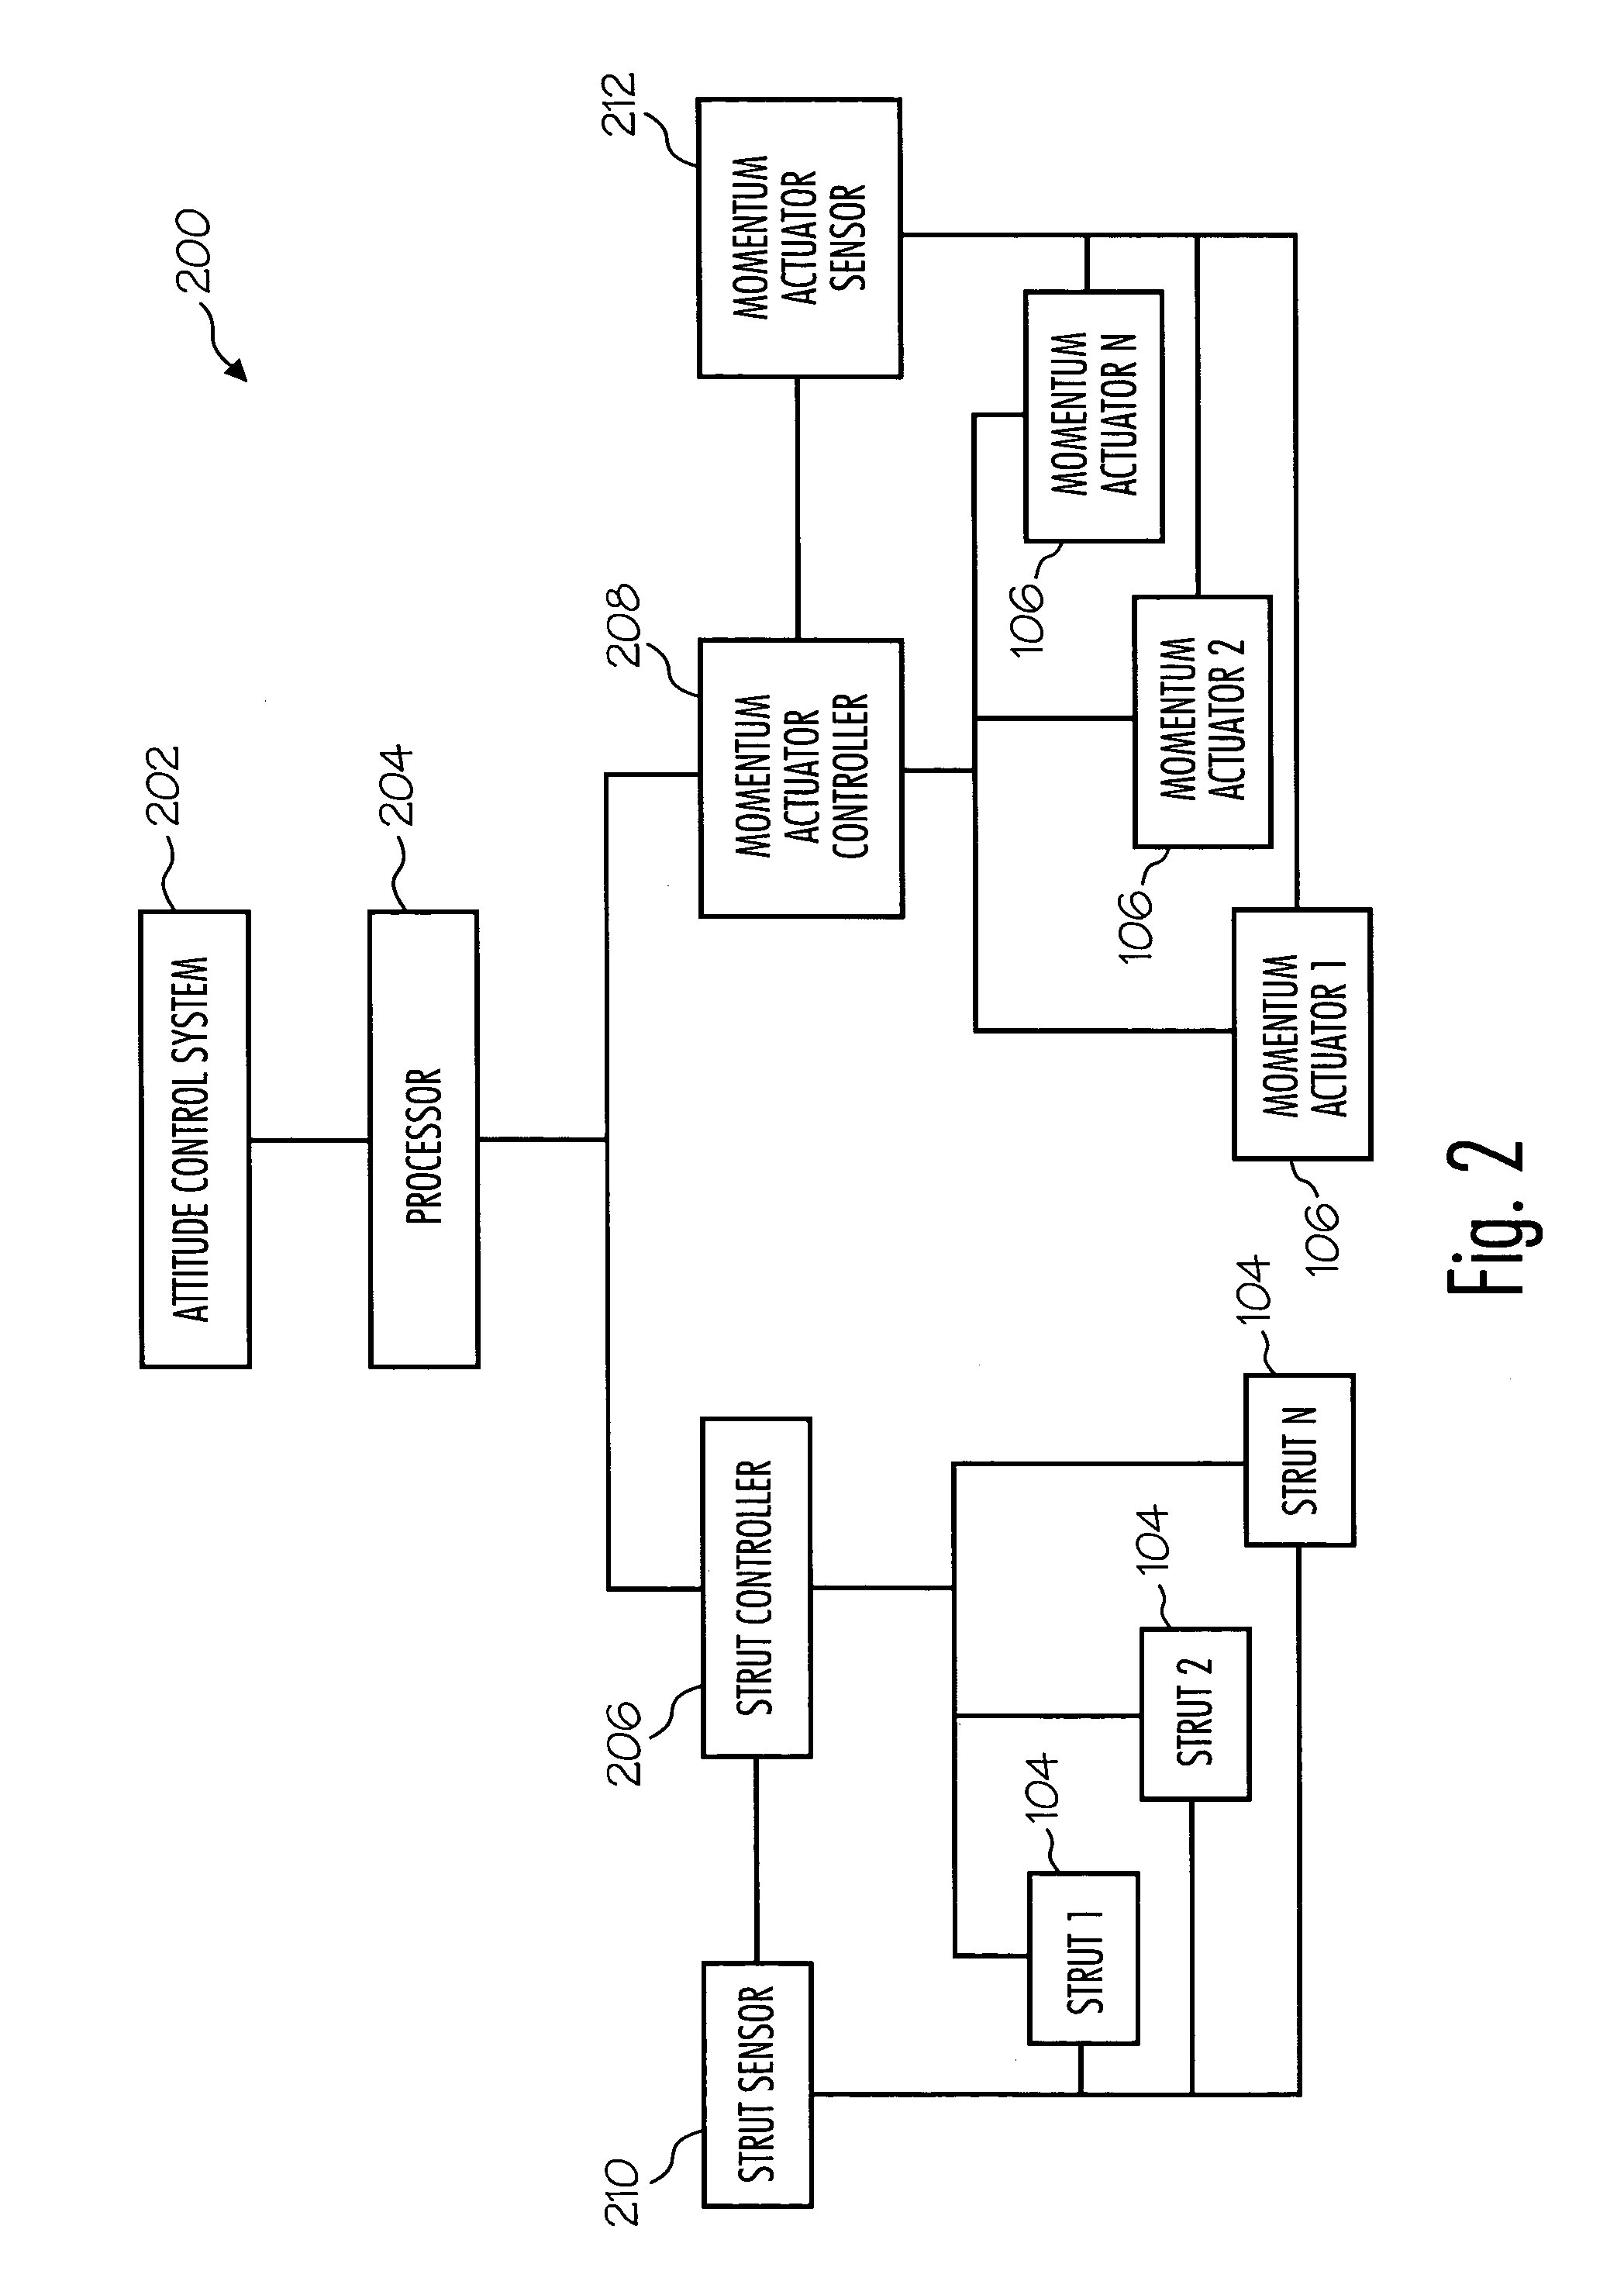 Method and system for steering a momentum control system